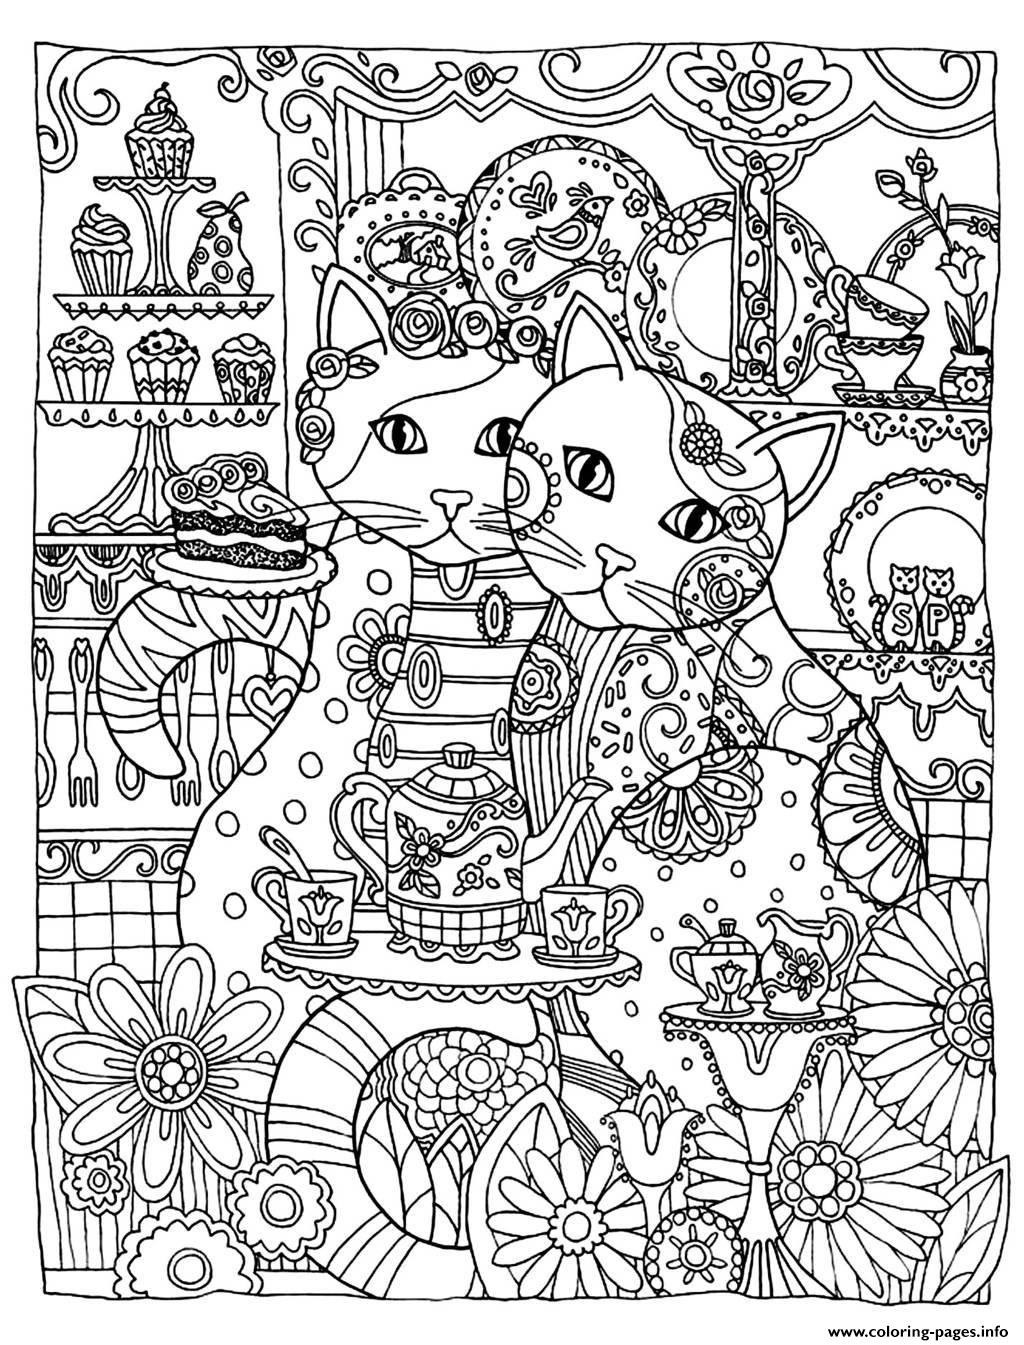 Cute Adult Coloring Pages
 Adult Two Cute Cats Coloring Pages Printable